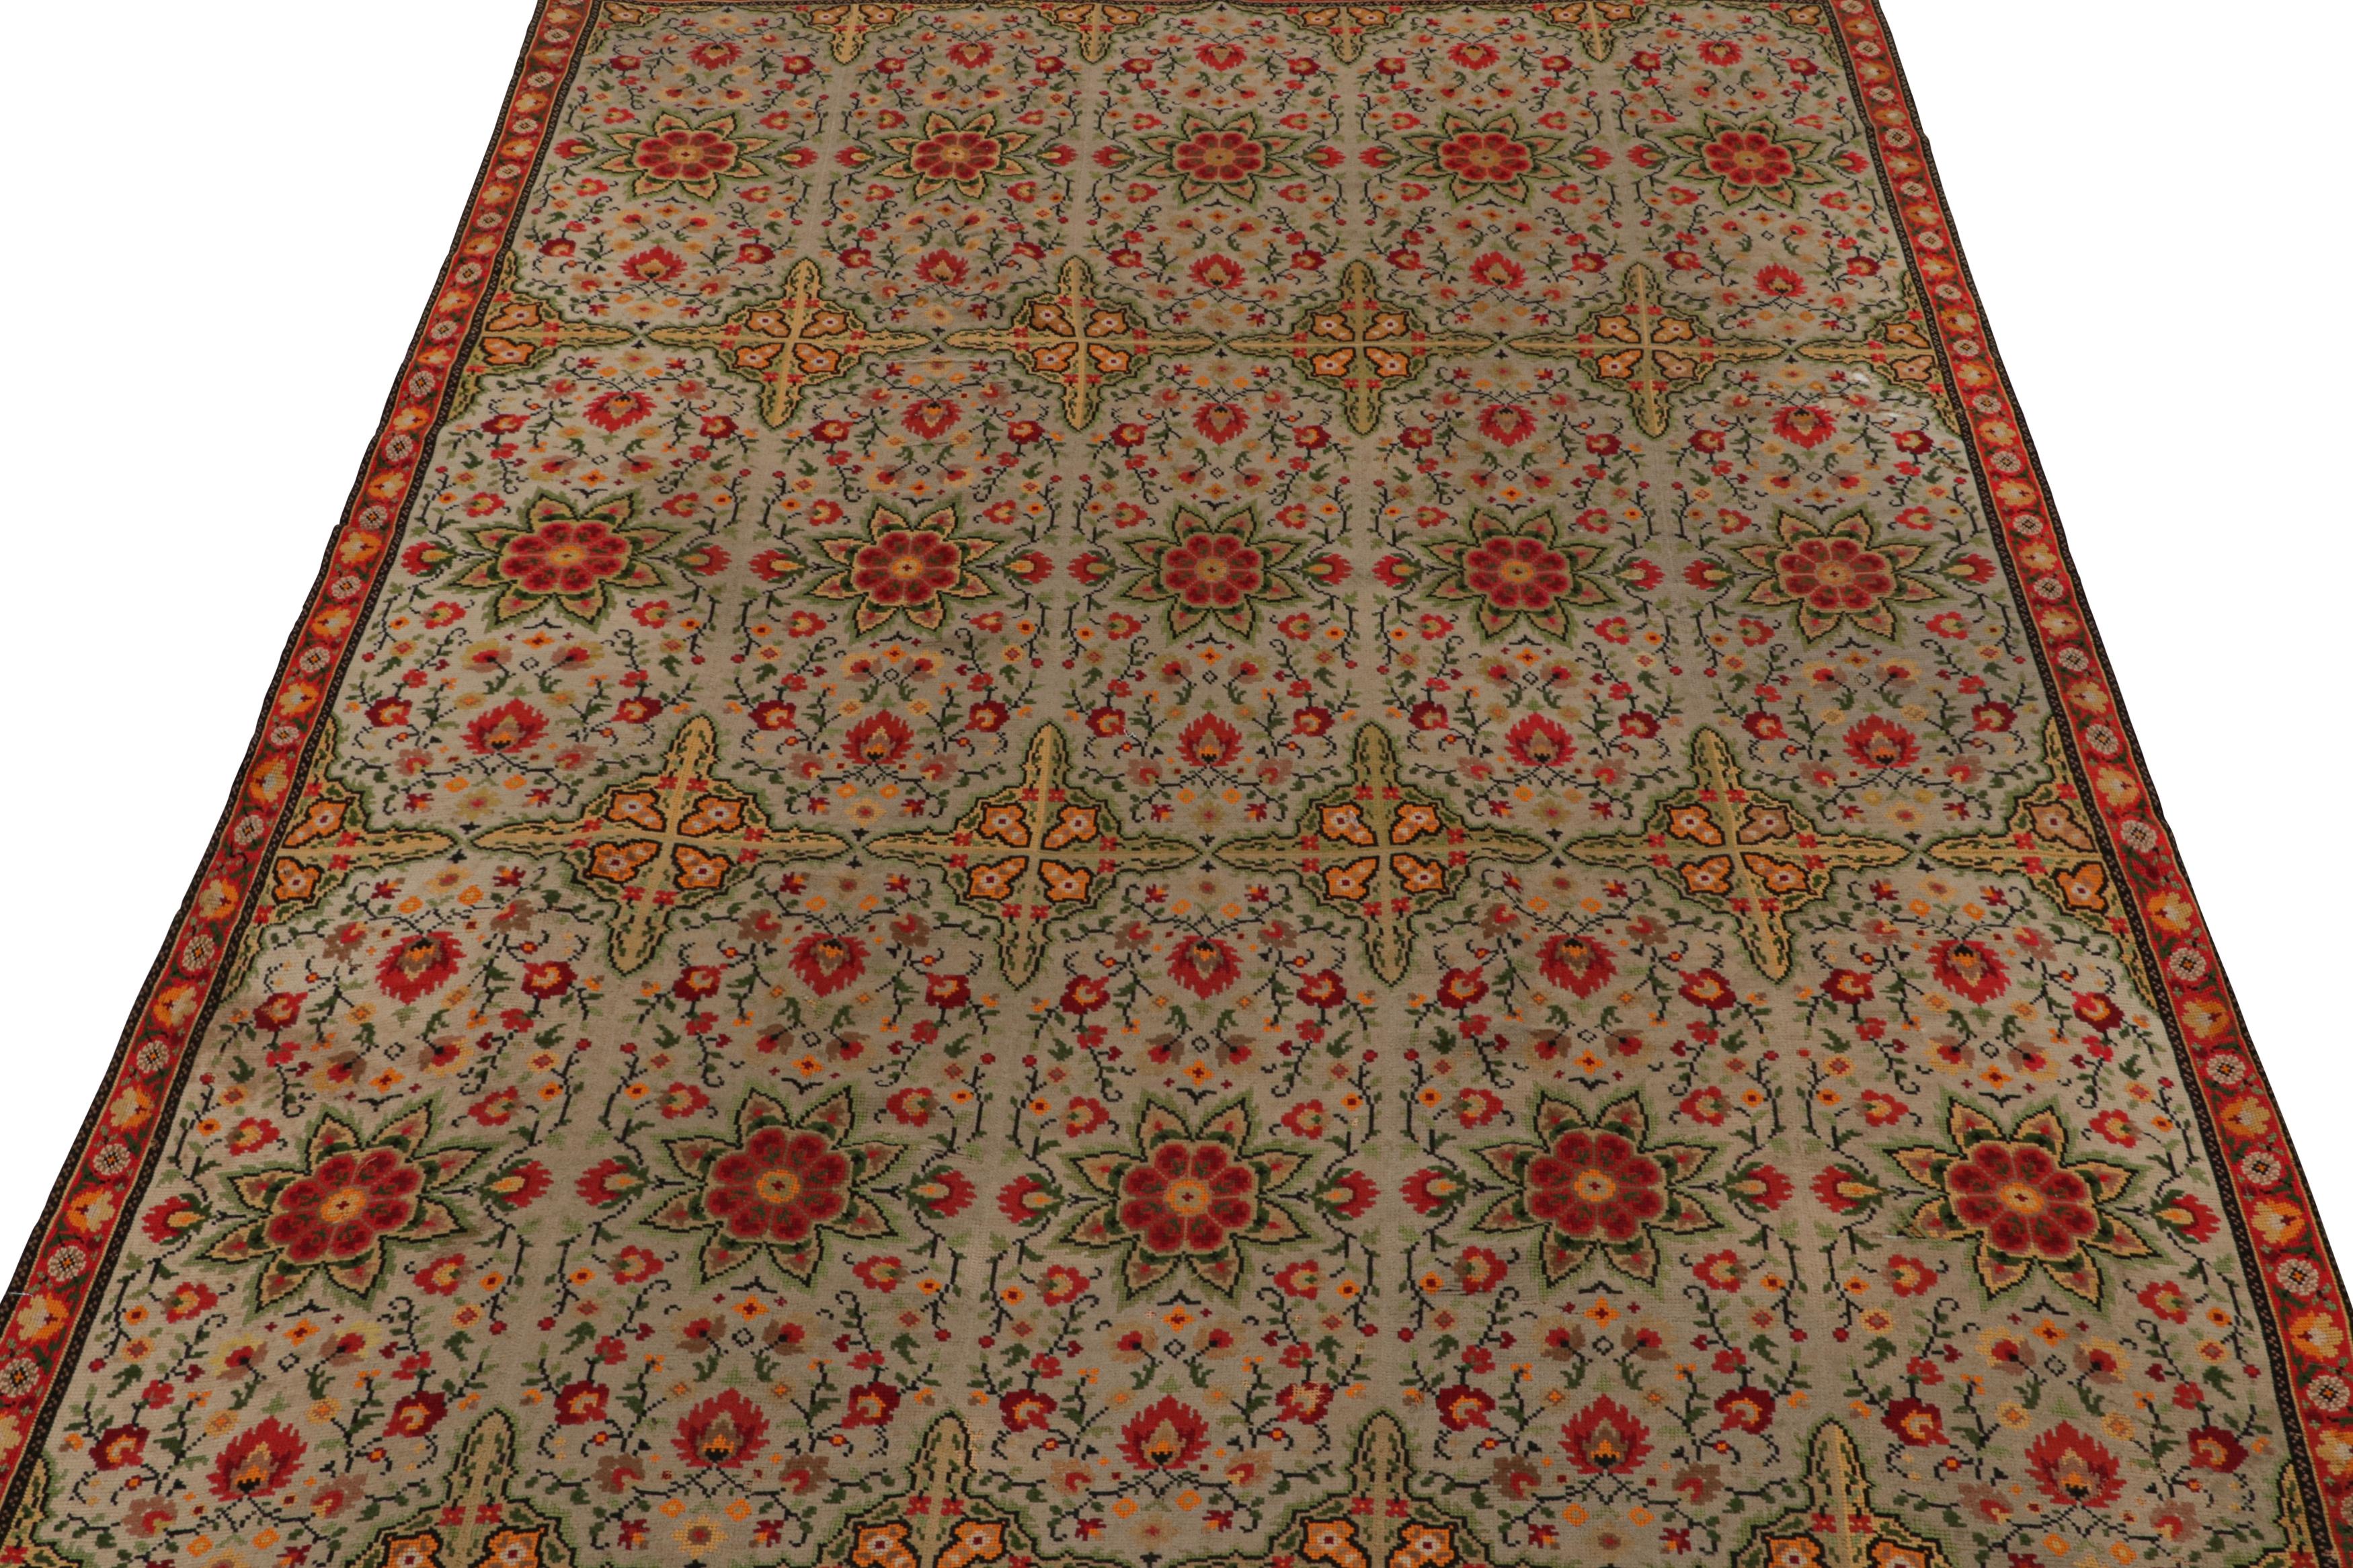 Hand-Woven Antique French Needlepoint Rug in Beige with Floral Patterns, from Rug & Kilim For Sale